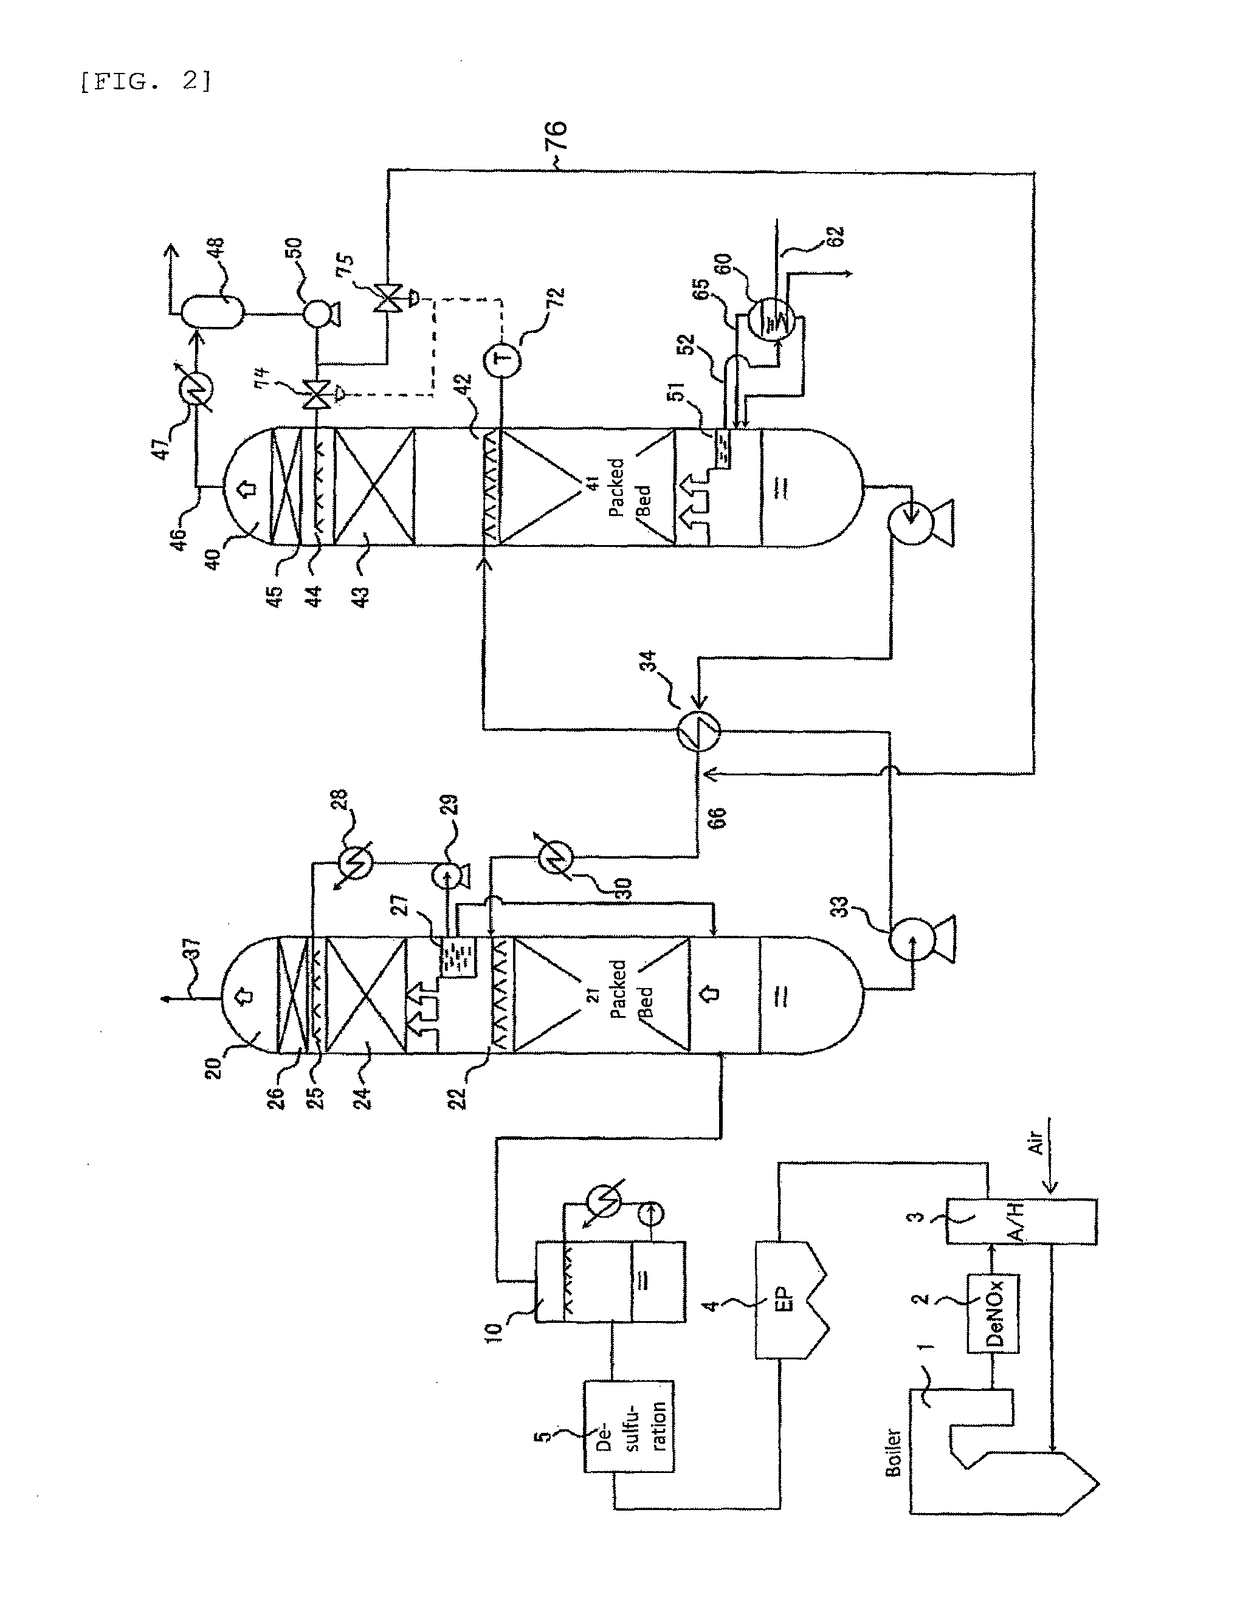 System for chemically absorbing carbon dioxide in combustion exhaust gas